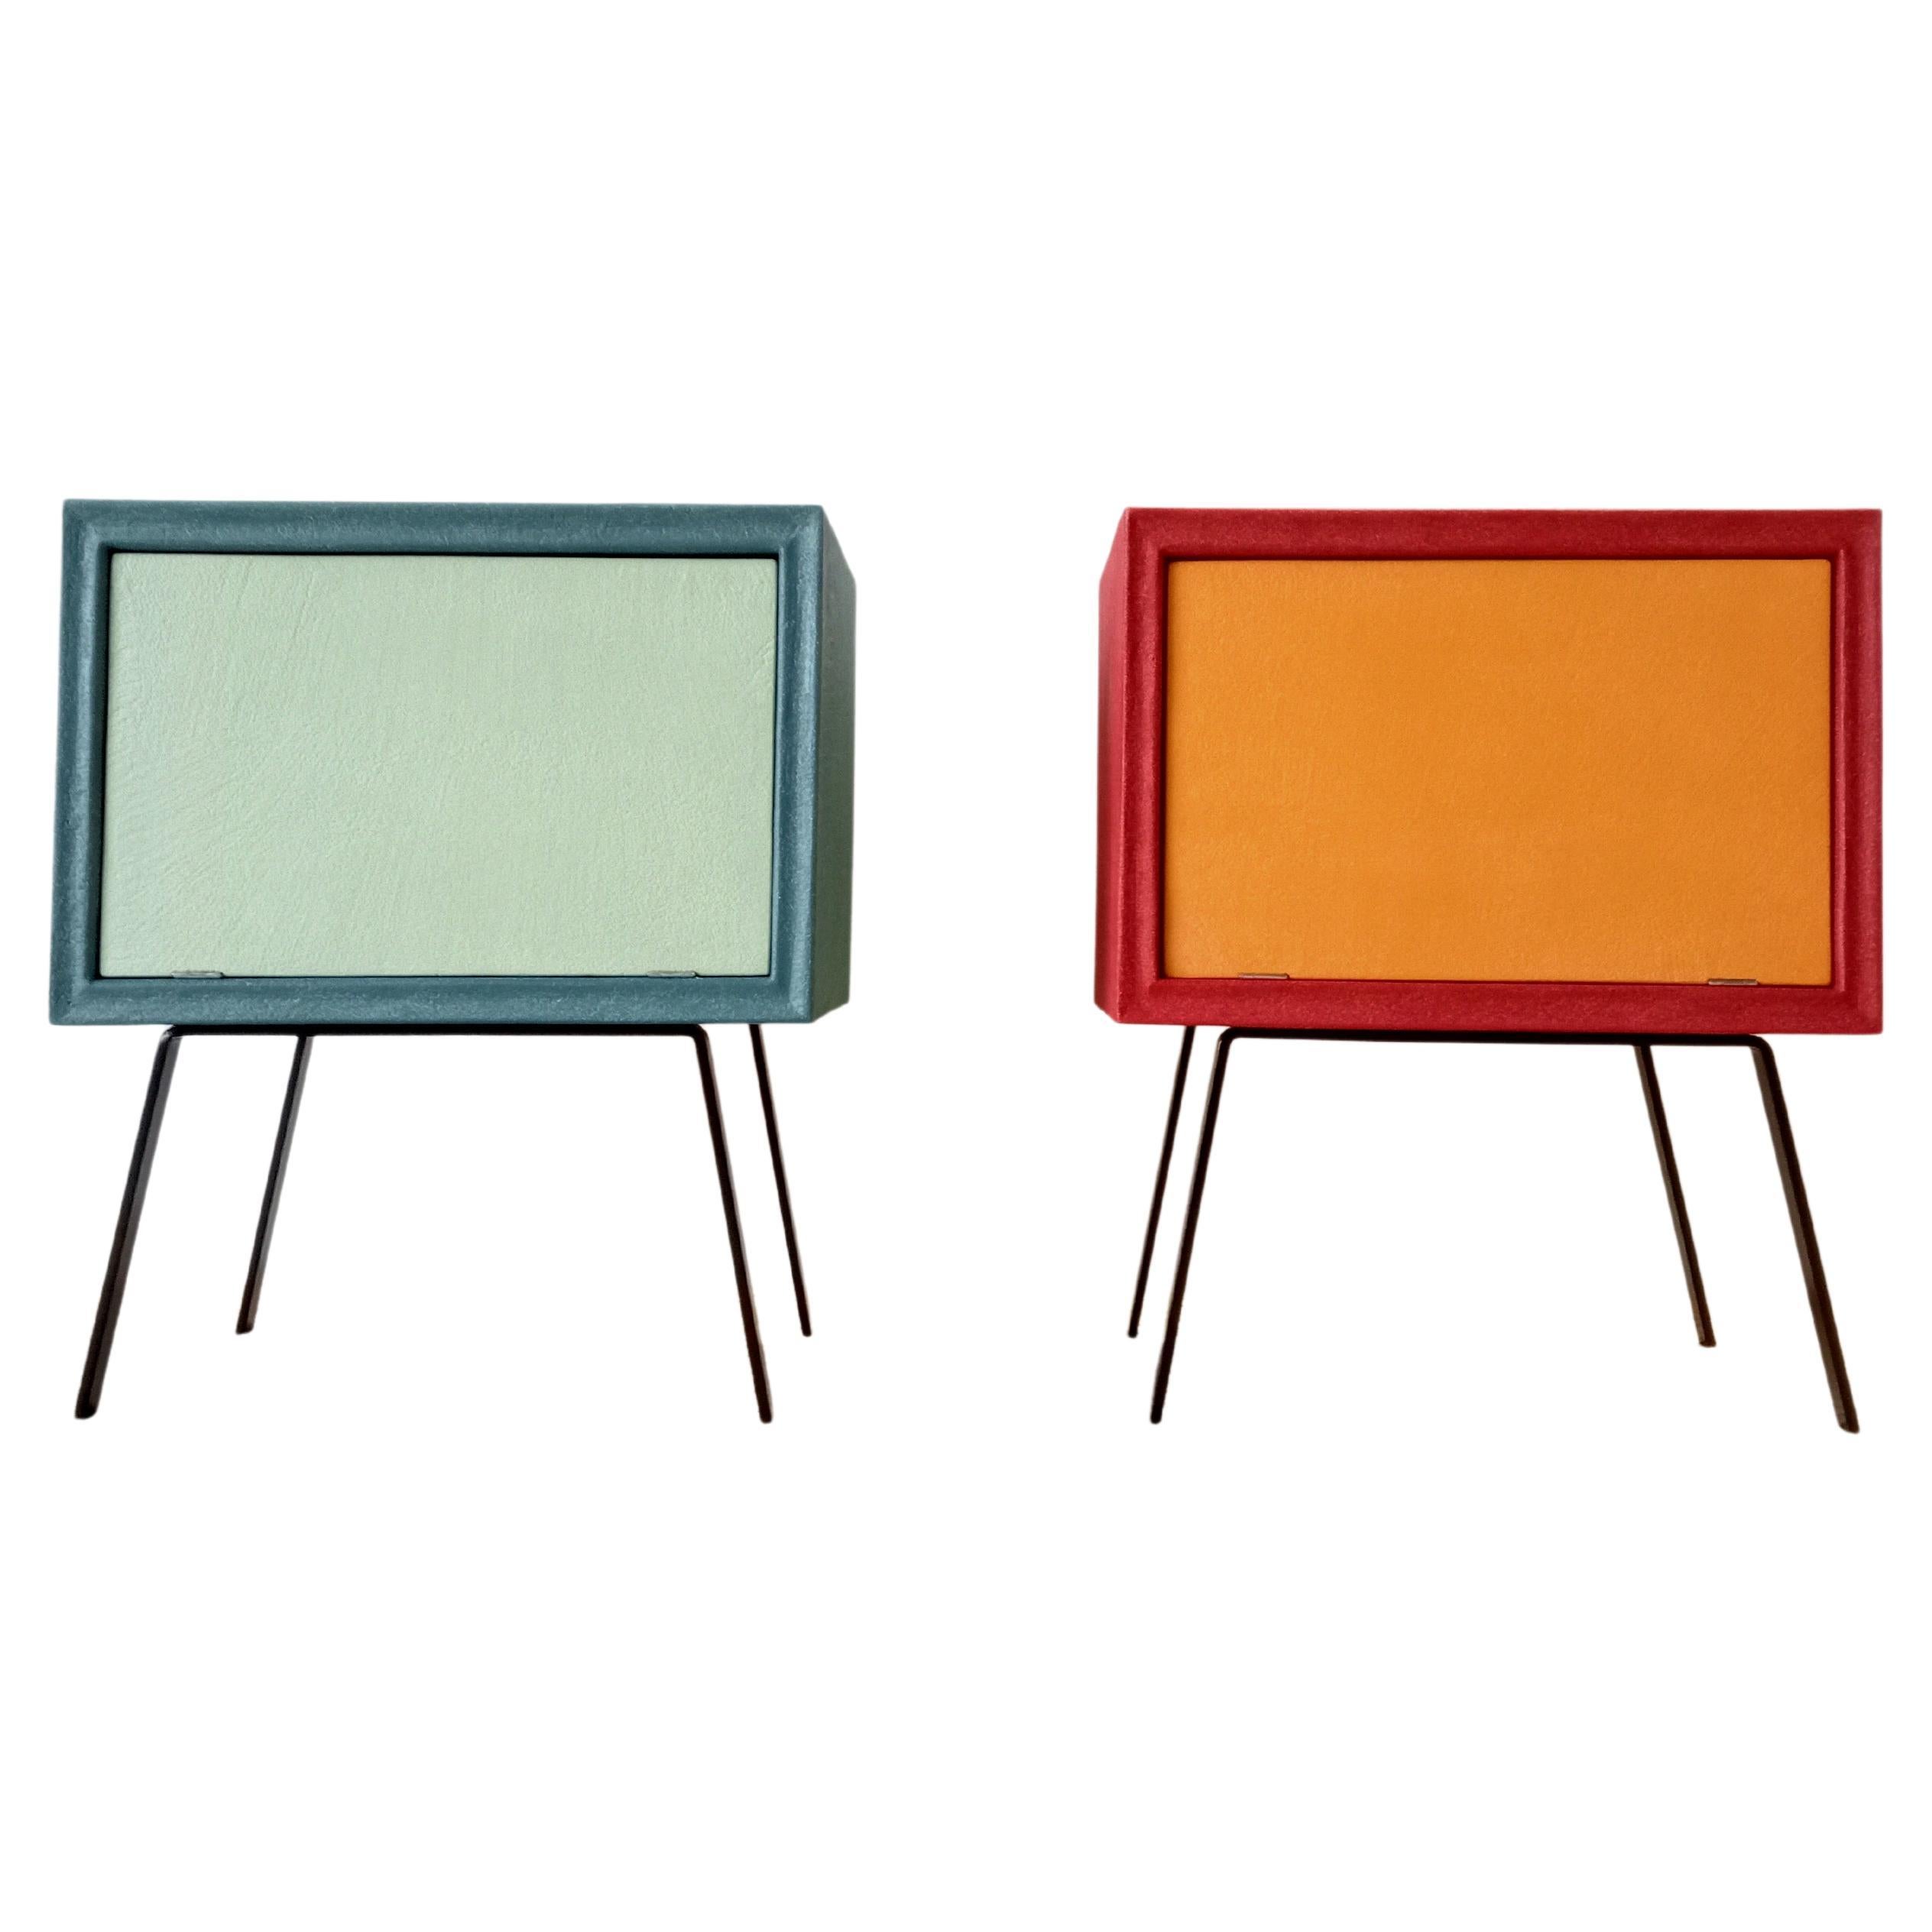 Italian Design Pair of Cabinets Contemporary Wood and coloured Resin Available For Sale